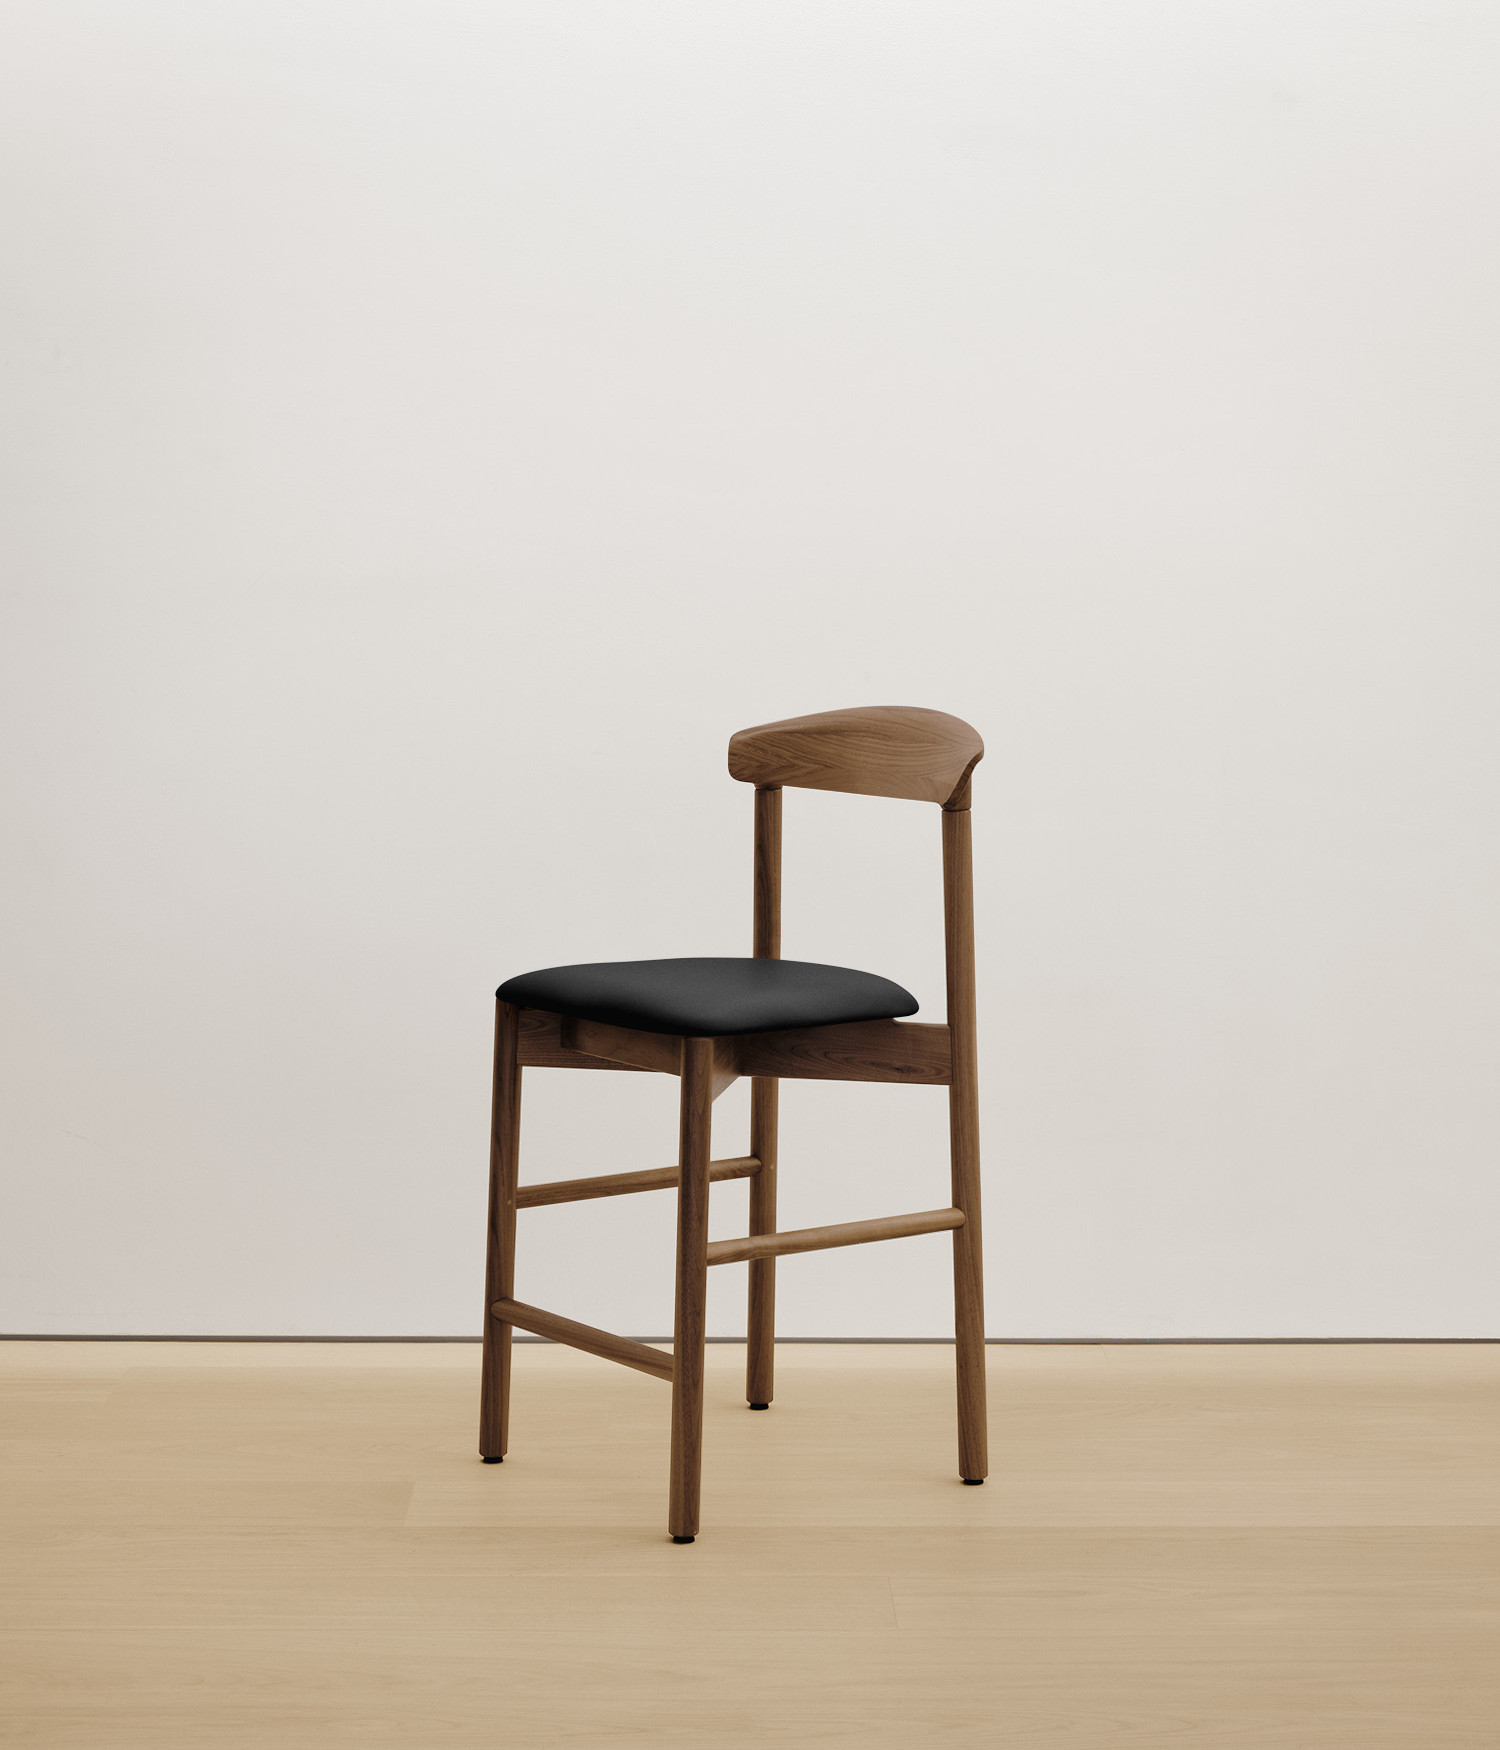  walnut stool with black color upholstered seat